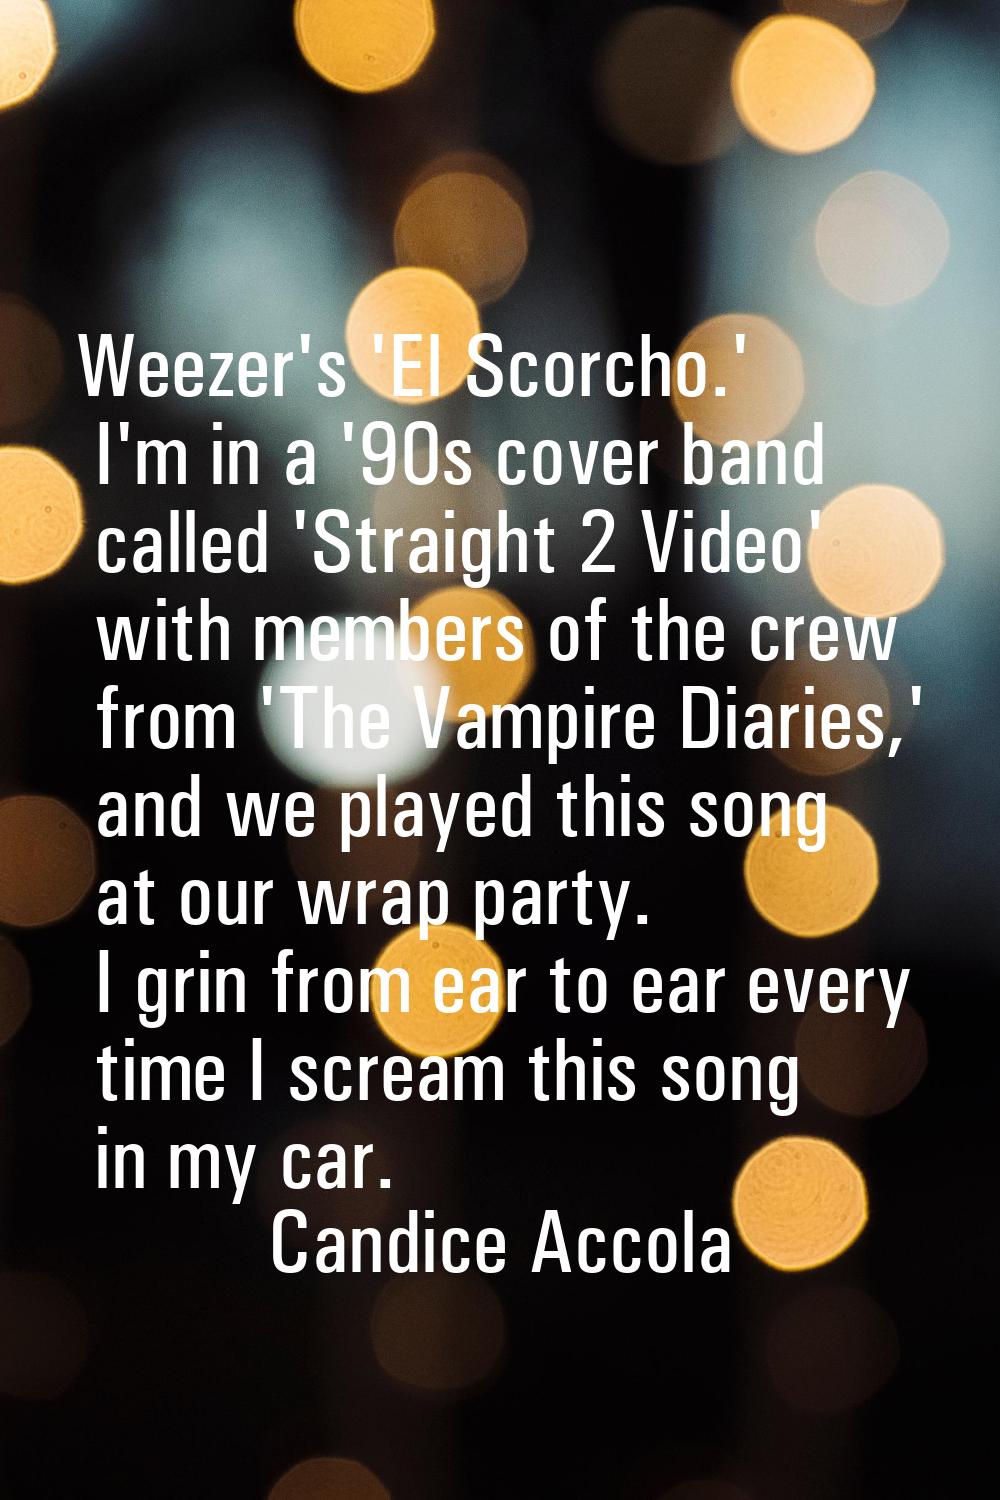 Weezer's 'El Scorcho.' I'm in a '90s cover band called 'Straight 2 Video' with members of the crew 